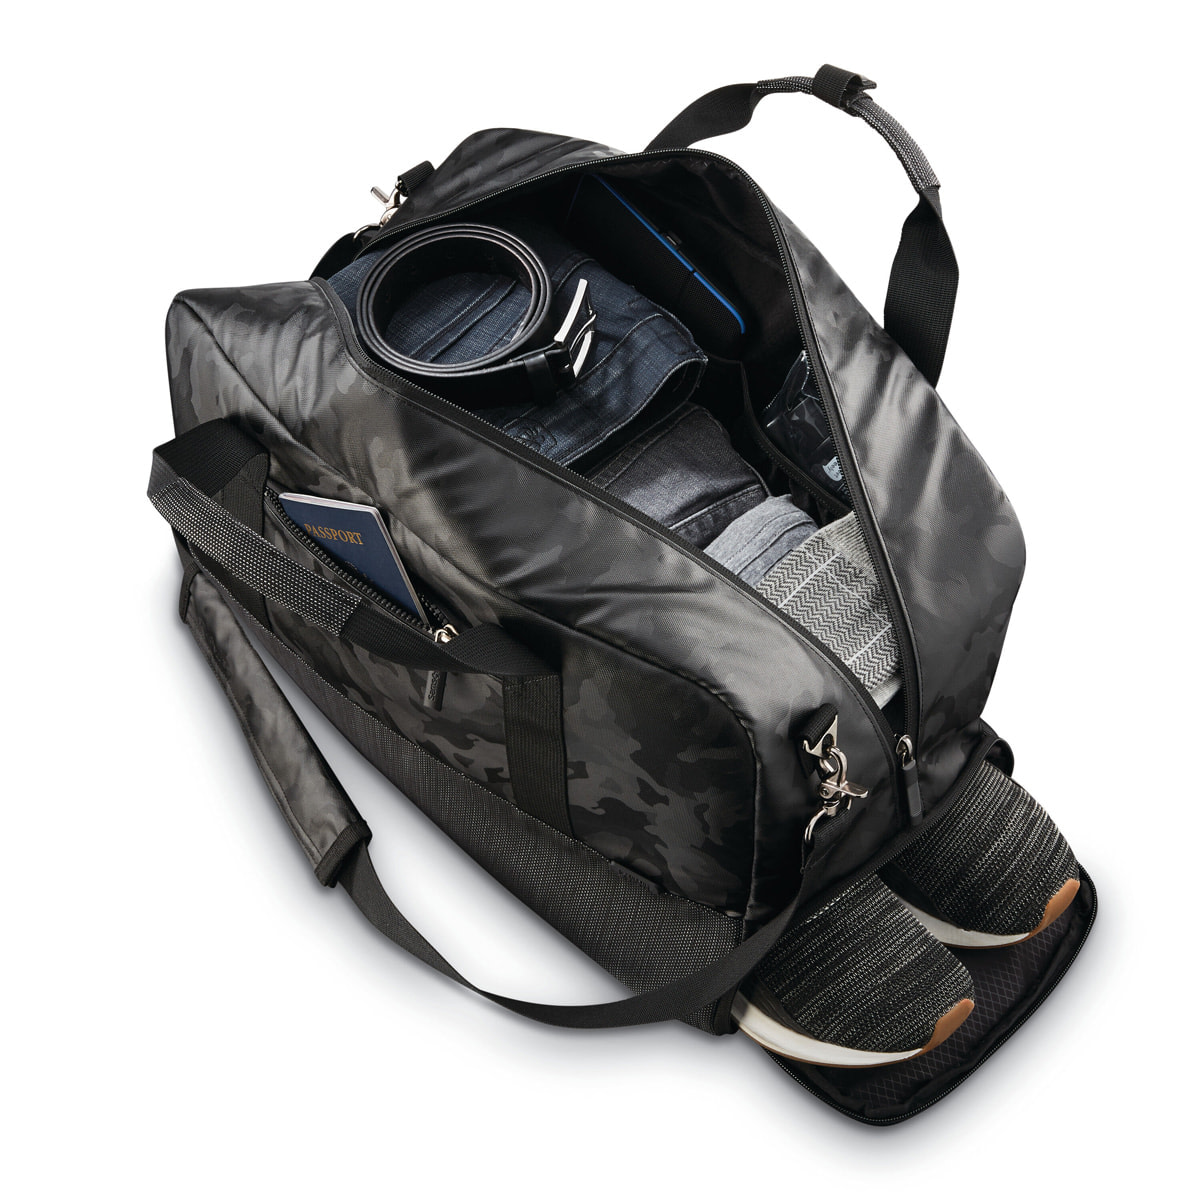 Mens duffle bag with shoe compartment